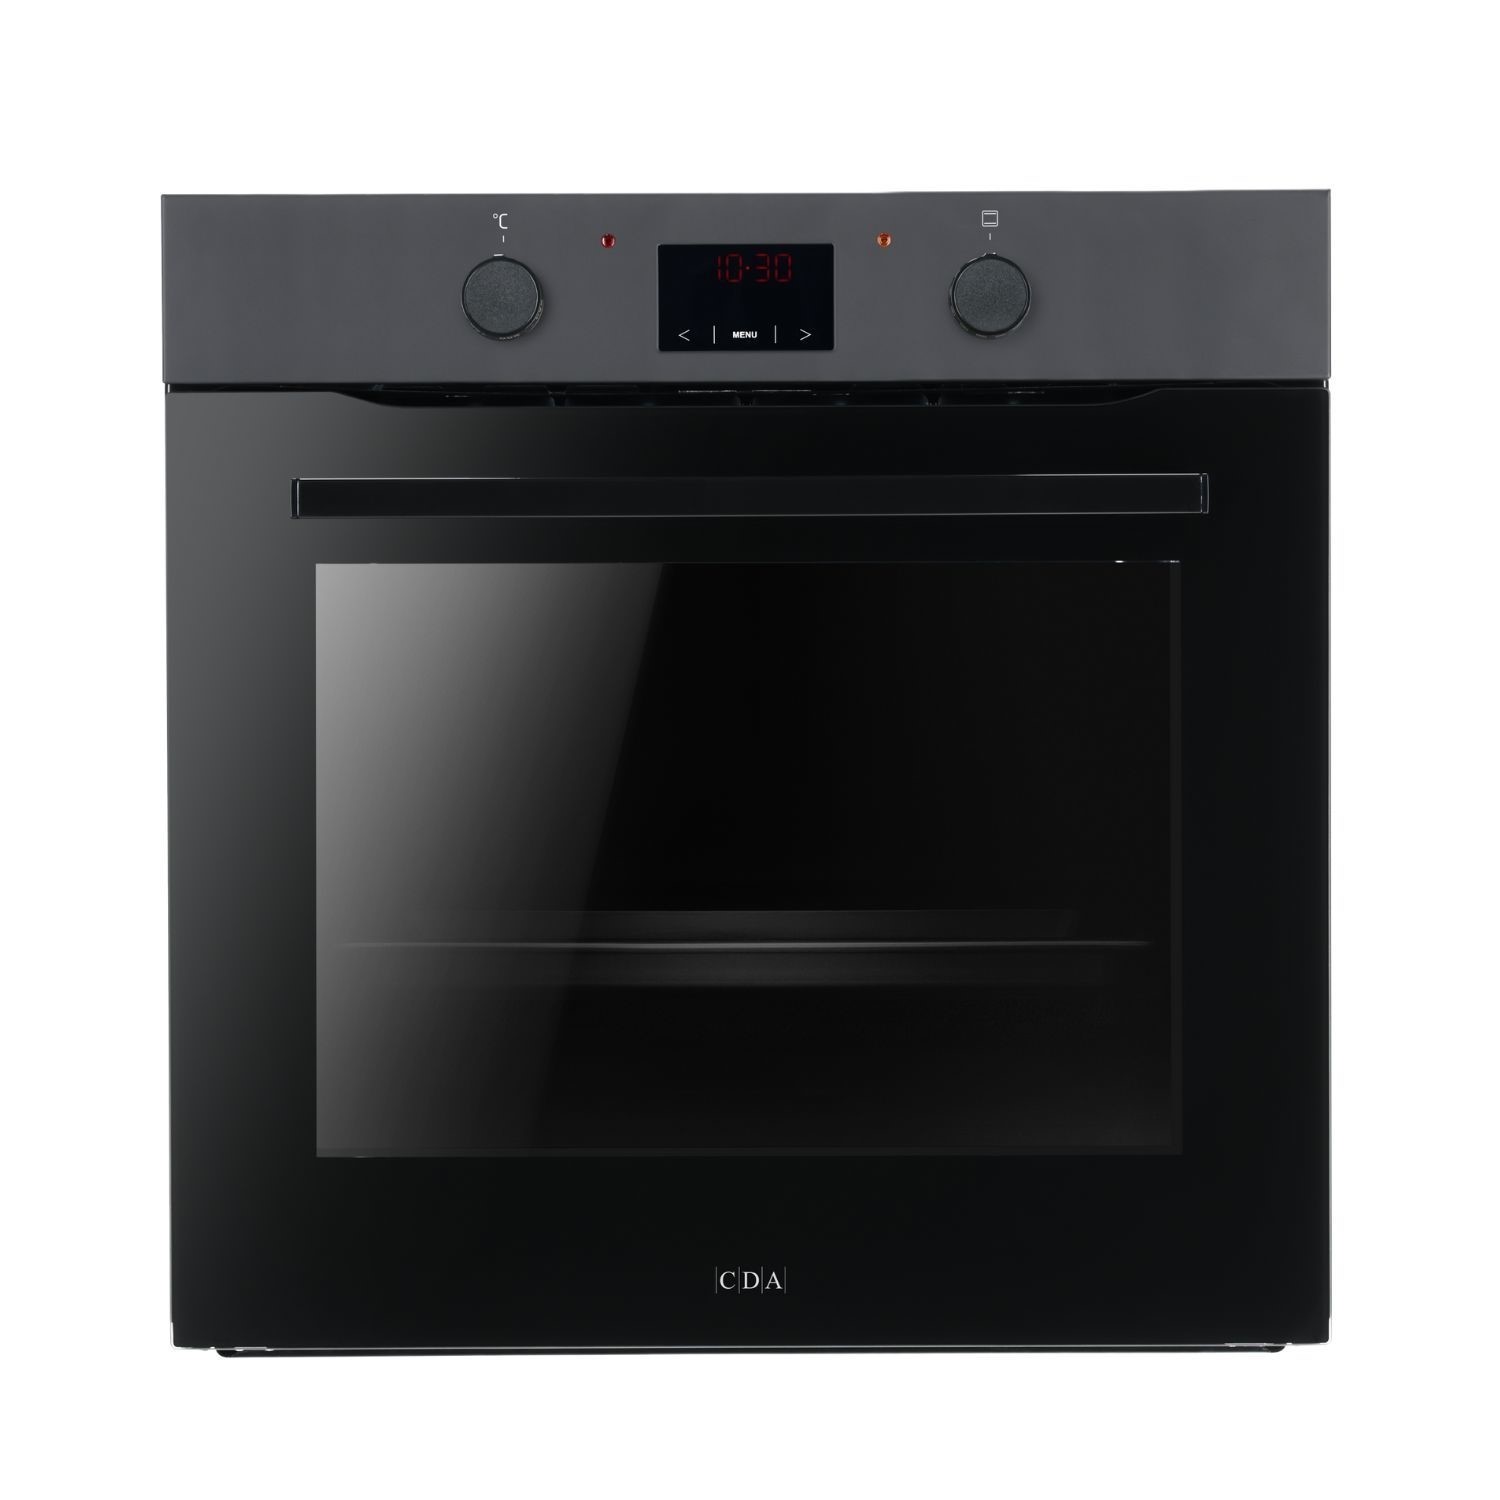 Photos - Other for Computer CDA Electric Single Oven - Black SC035BL 